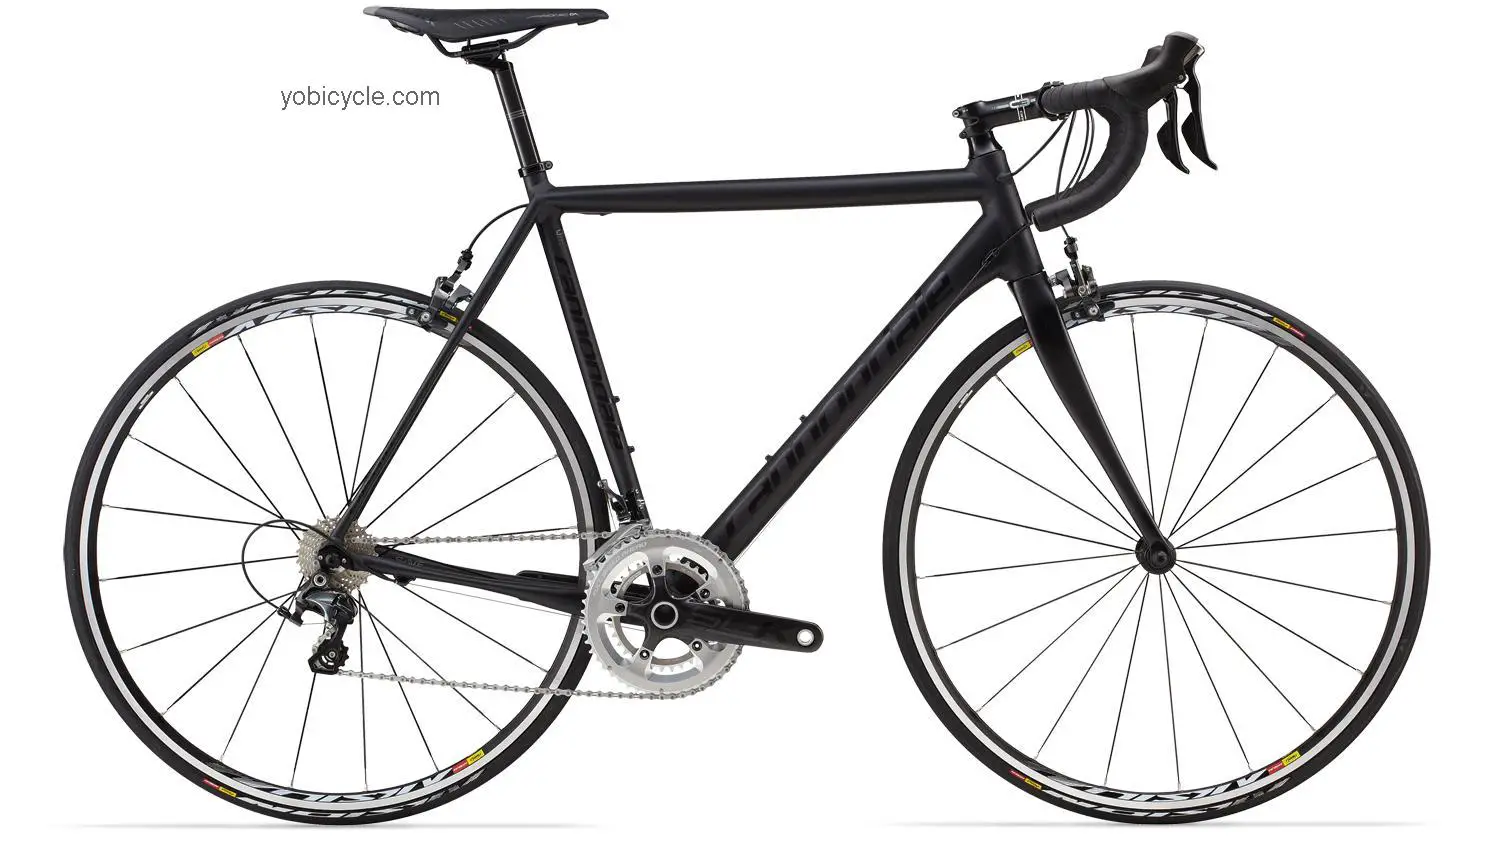 Cannondale CAAD10 3 Ultegra Compact 2014 comparison online with competitors